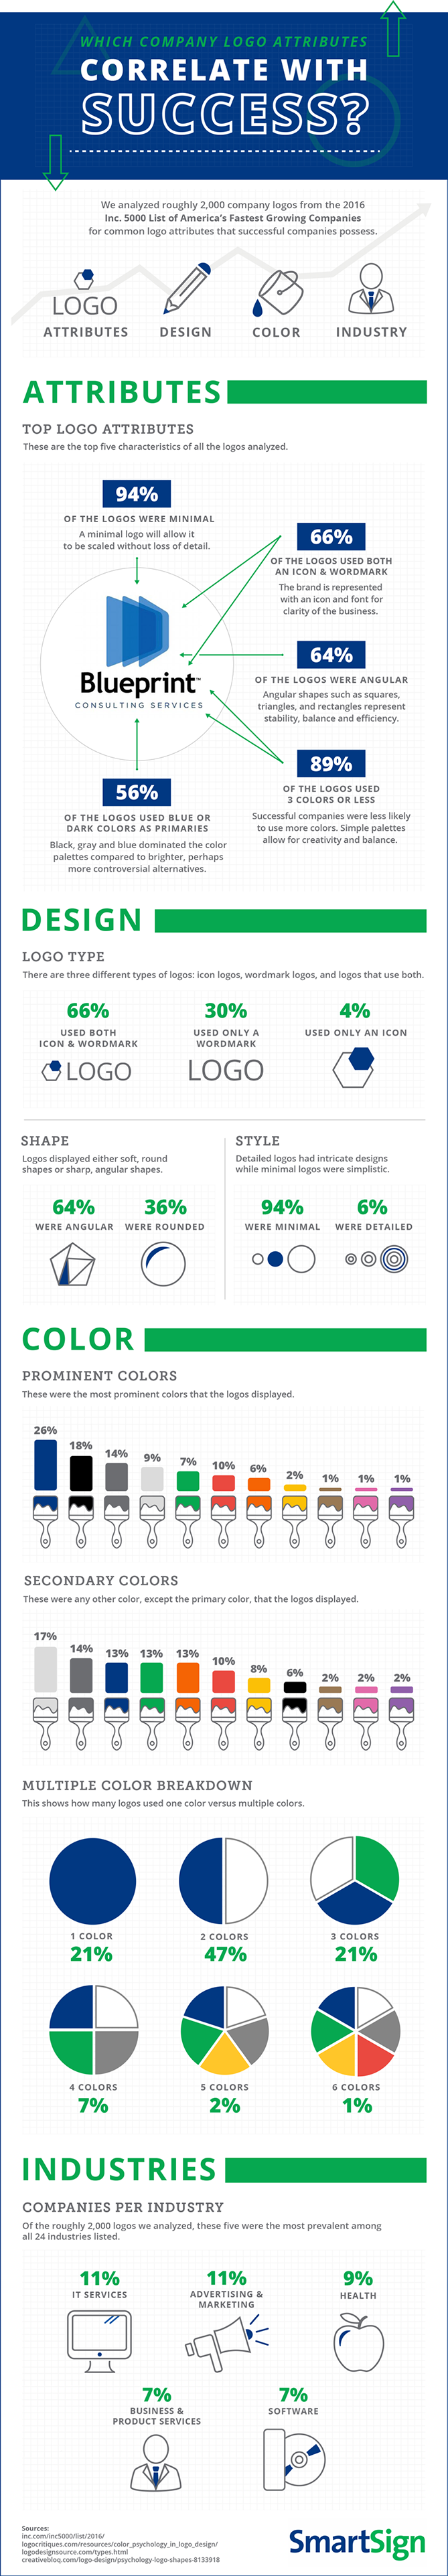 Somebody Creative - Company Logos Correlate with Success Infographic